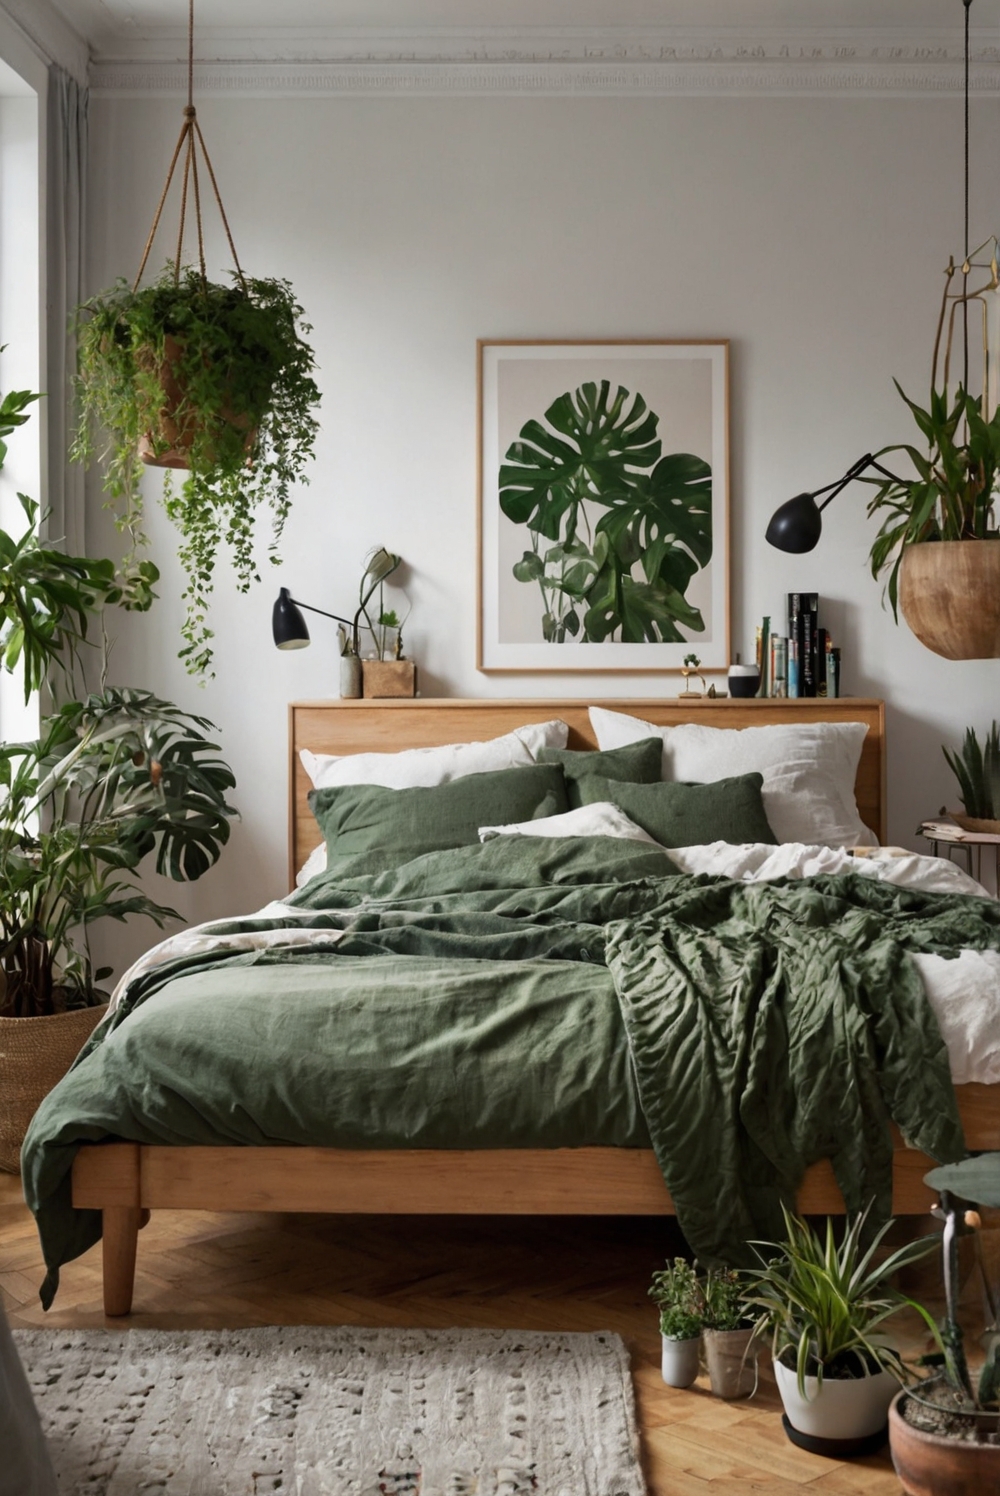 How to bring life and freshness to your bedroom with indoor plants and greenery?